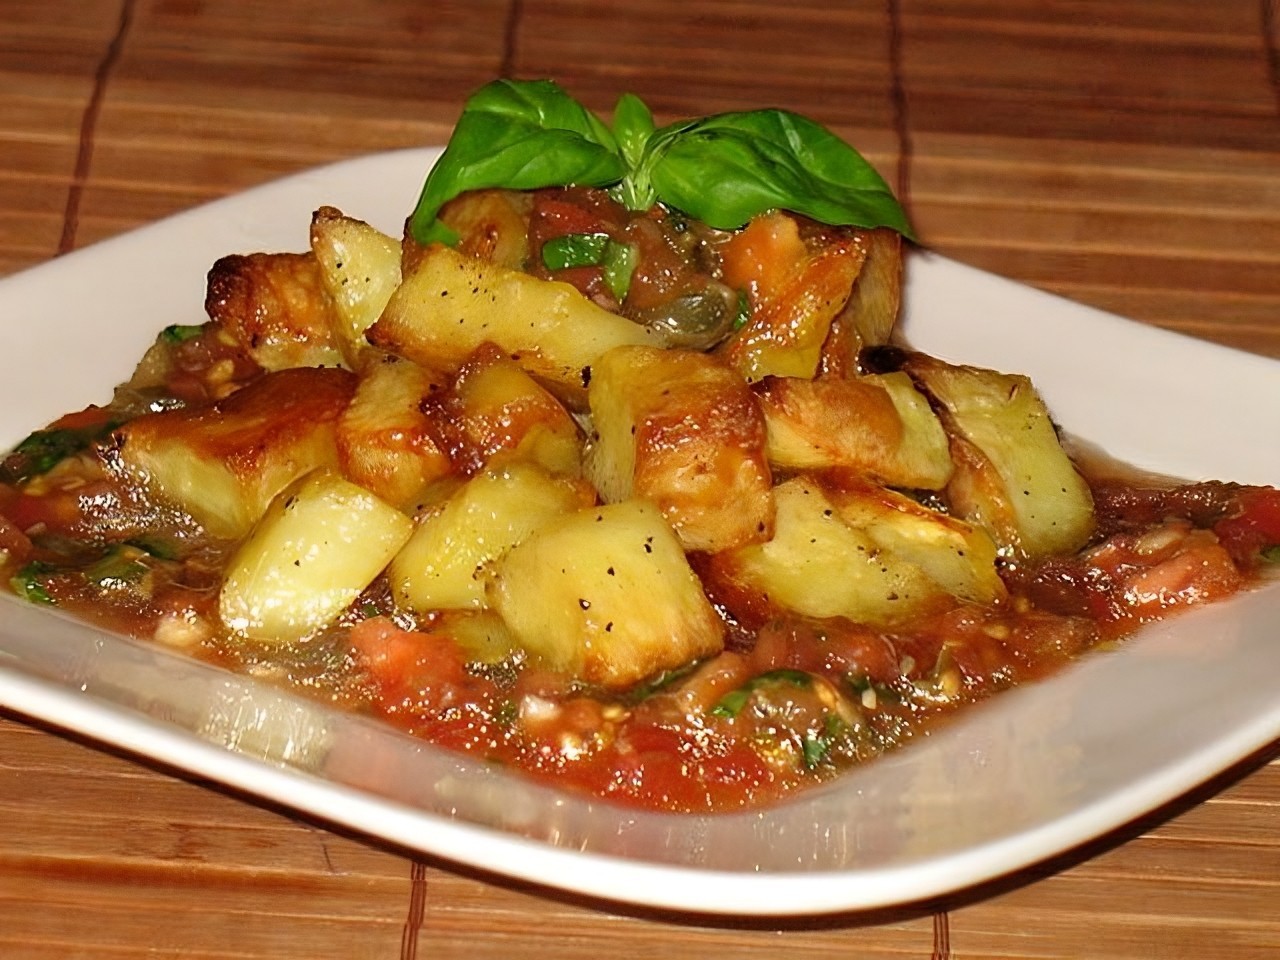 Quick side dish of baked potatoes with marinated tomatoes